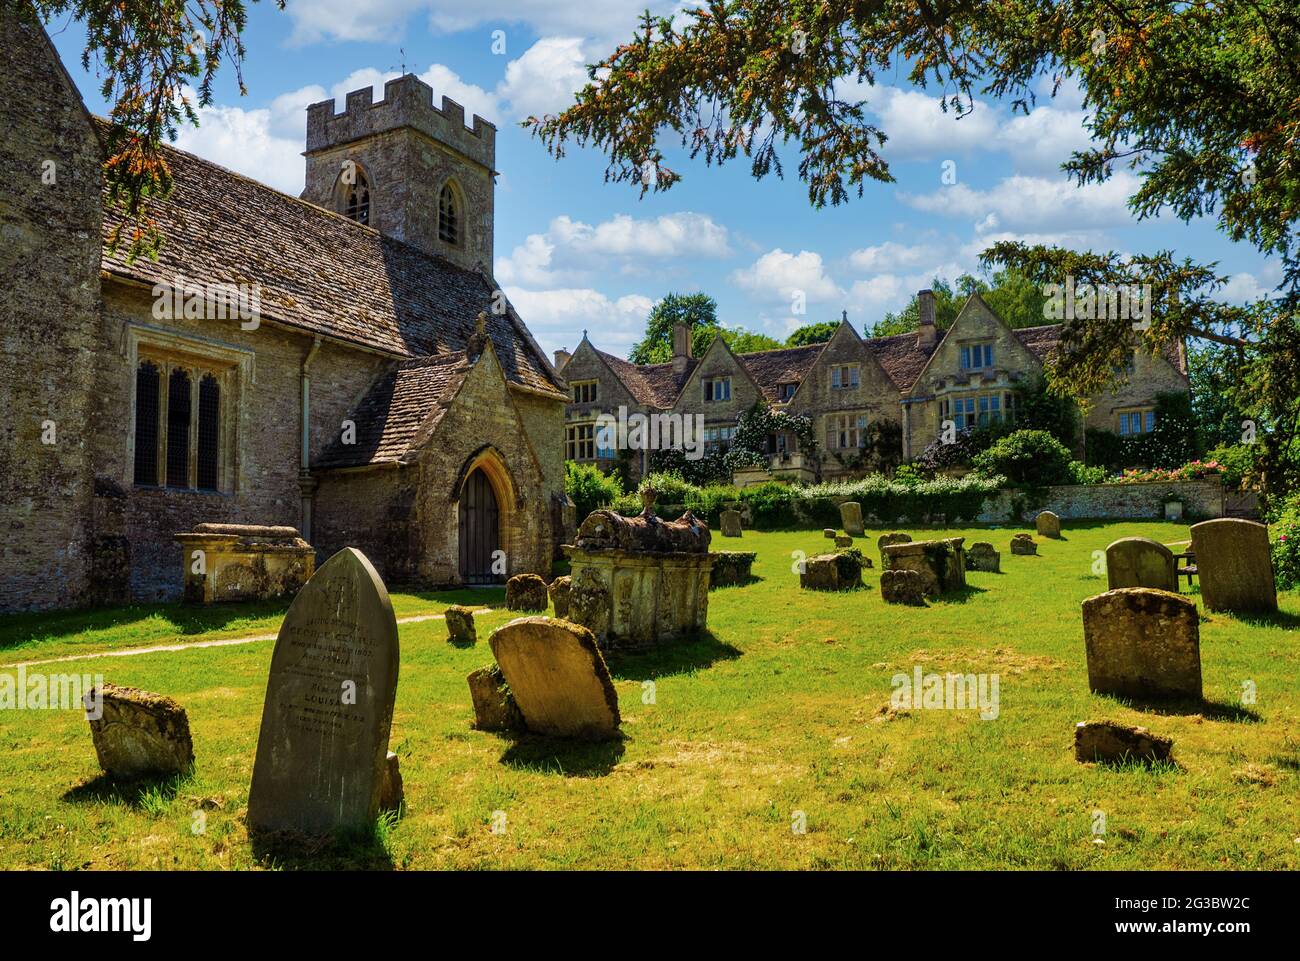 Asthall Manor is a Jacobean manor house in the Windrush Valley of Oxfordshire. It lies next to St Nicholas church in the village of Asthall. Stock Photo